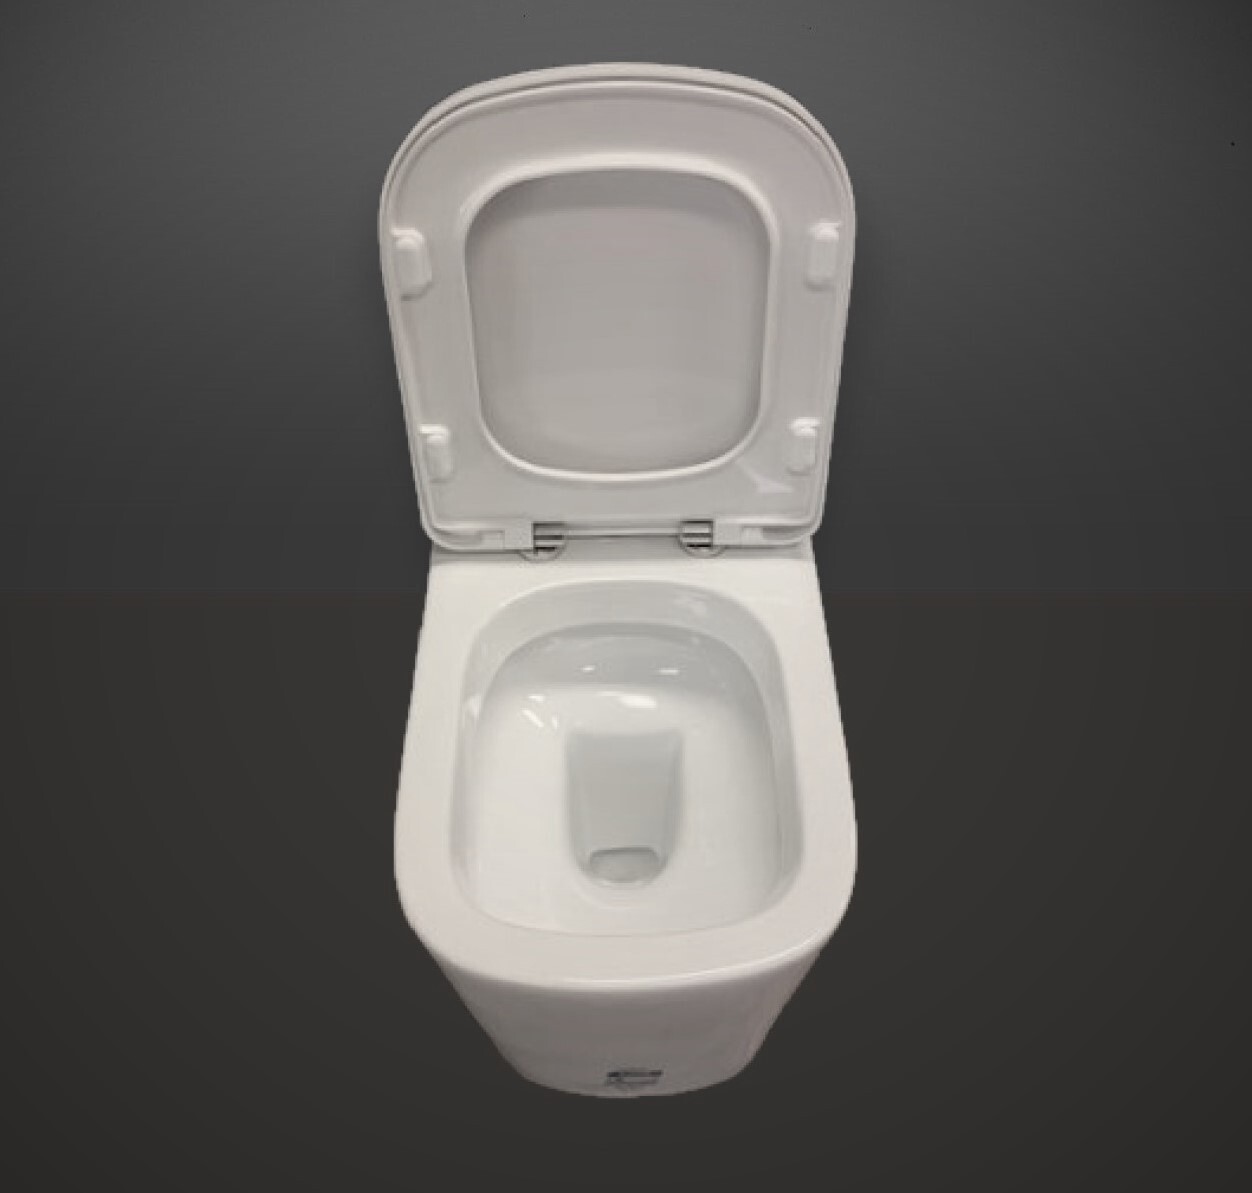 Ceramic Toilet Suite Concealed Cistern Floor Pan Model Lucca GC89TB, Chrome Round Buttons, Under Bench/Short, S-Trap 70mm